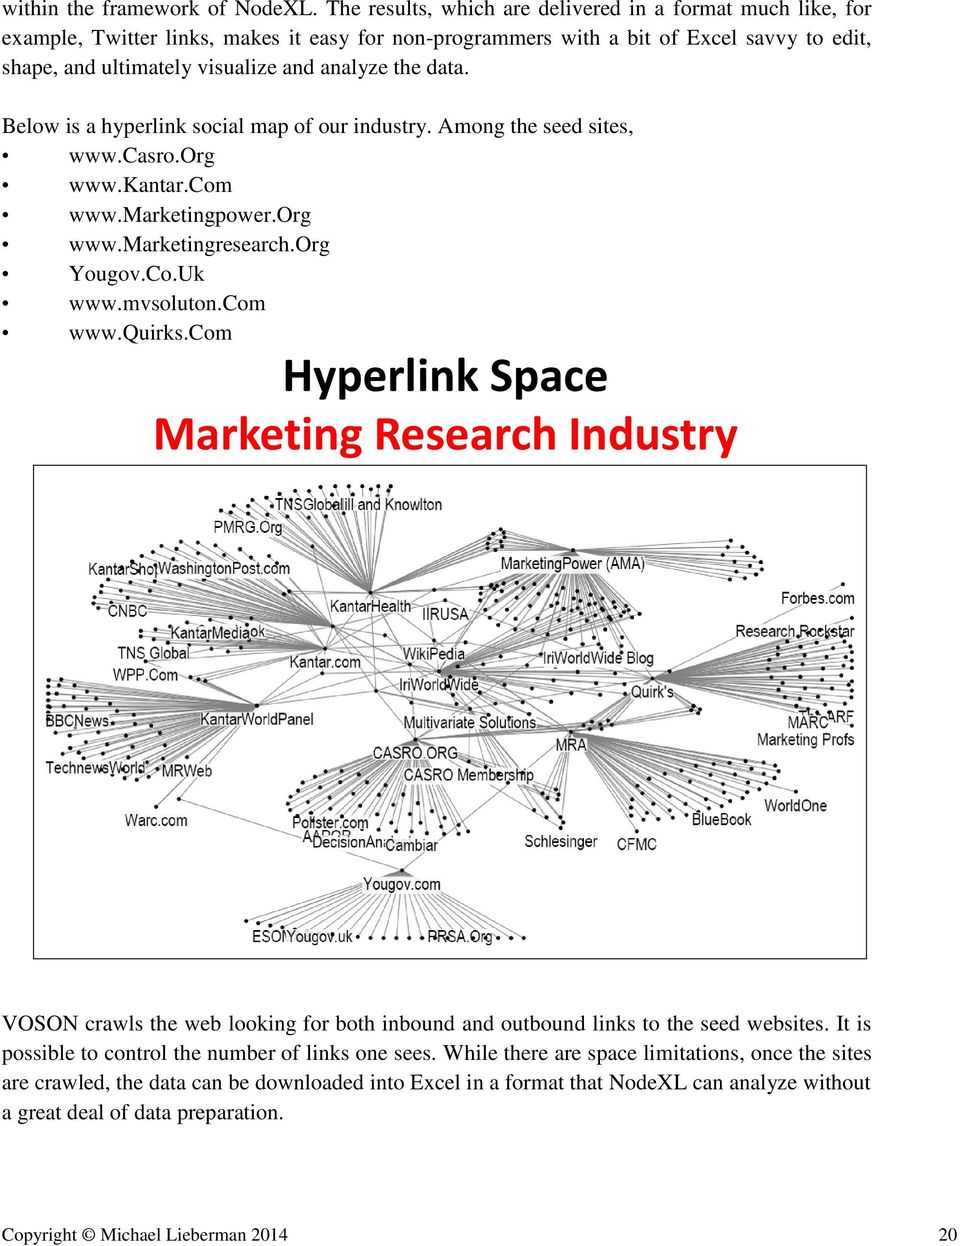 the data. Below is a hyperlink social map of our industry. Among the seed sites, www.casro.org www.kantar.com www.marketingpower.org www.marketingresearch.org Yougov.Co.Uk www.mvsoluton.com www.quirks.